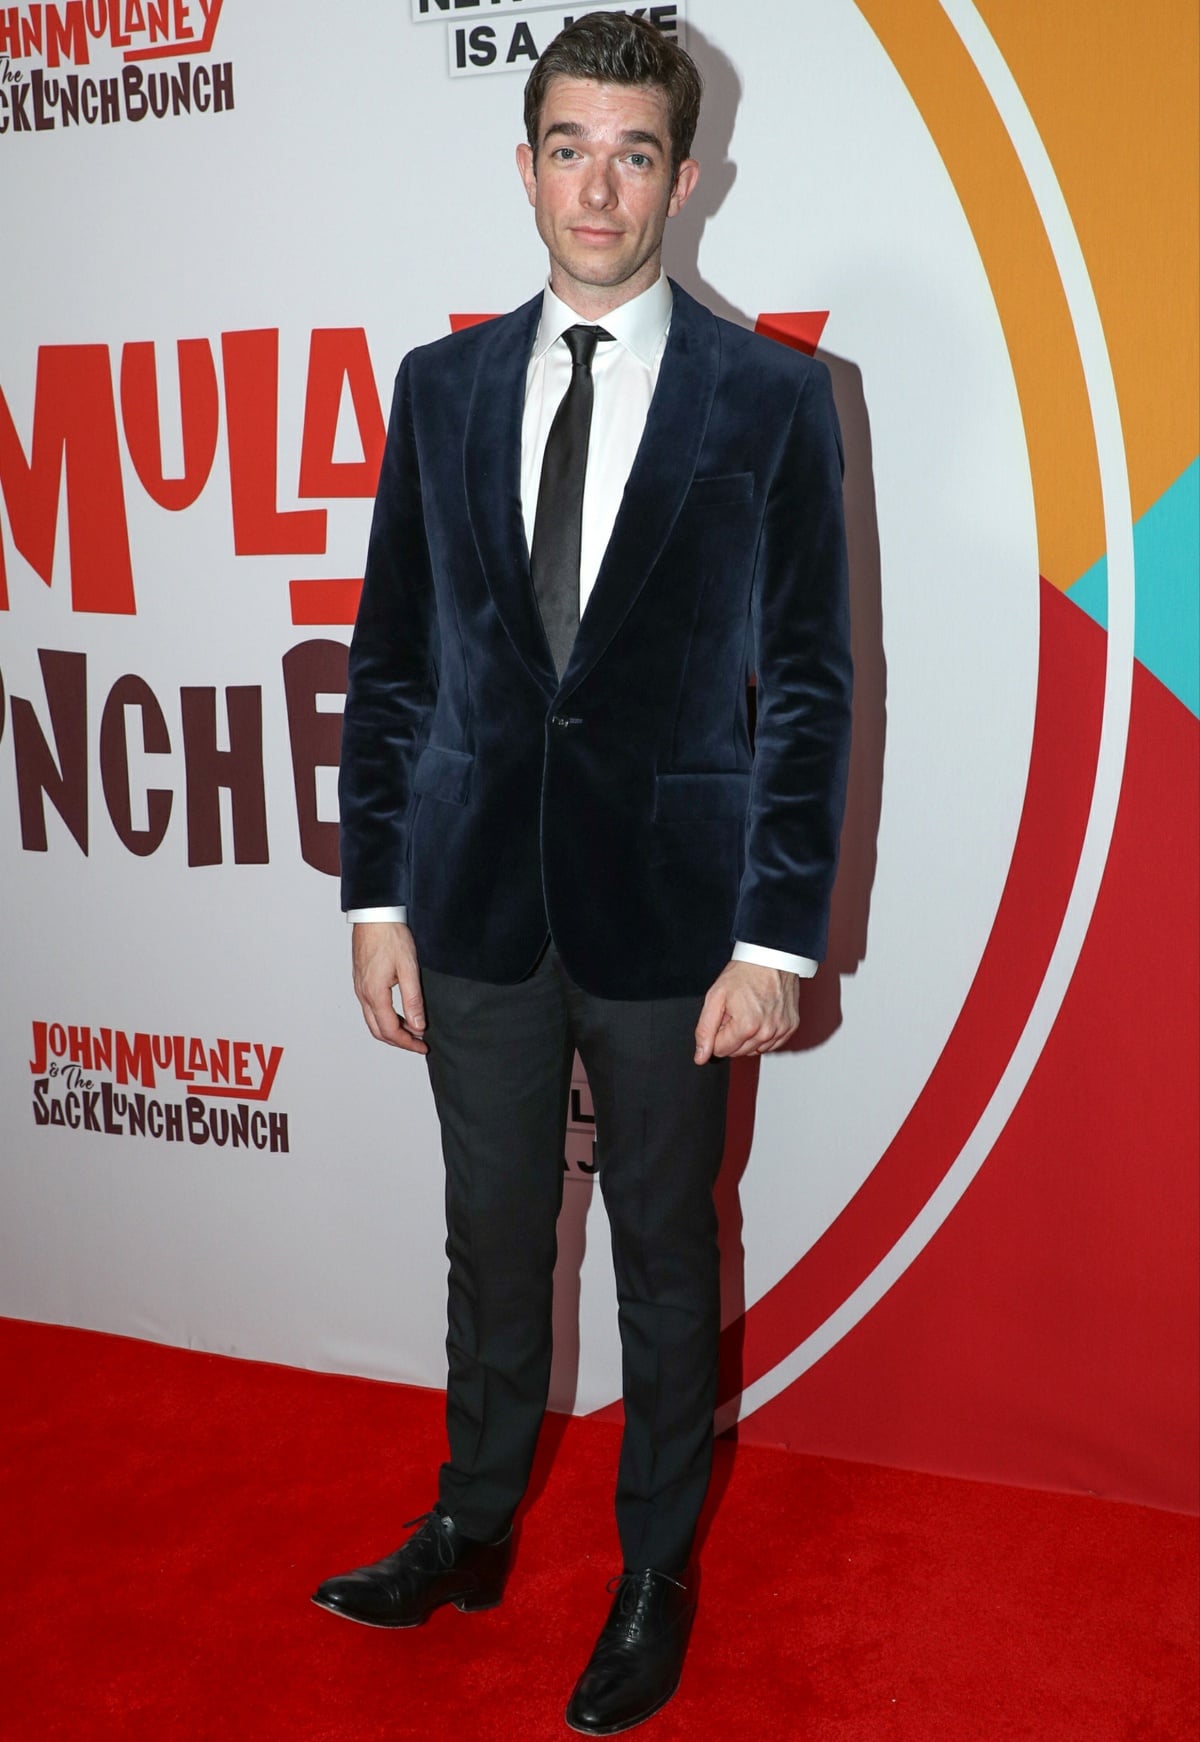 John Mulaney suited up for the special screening of John Mulaney & The Sack Lunch Brunch